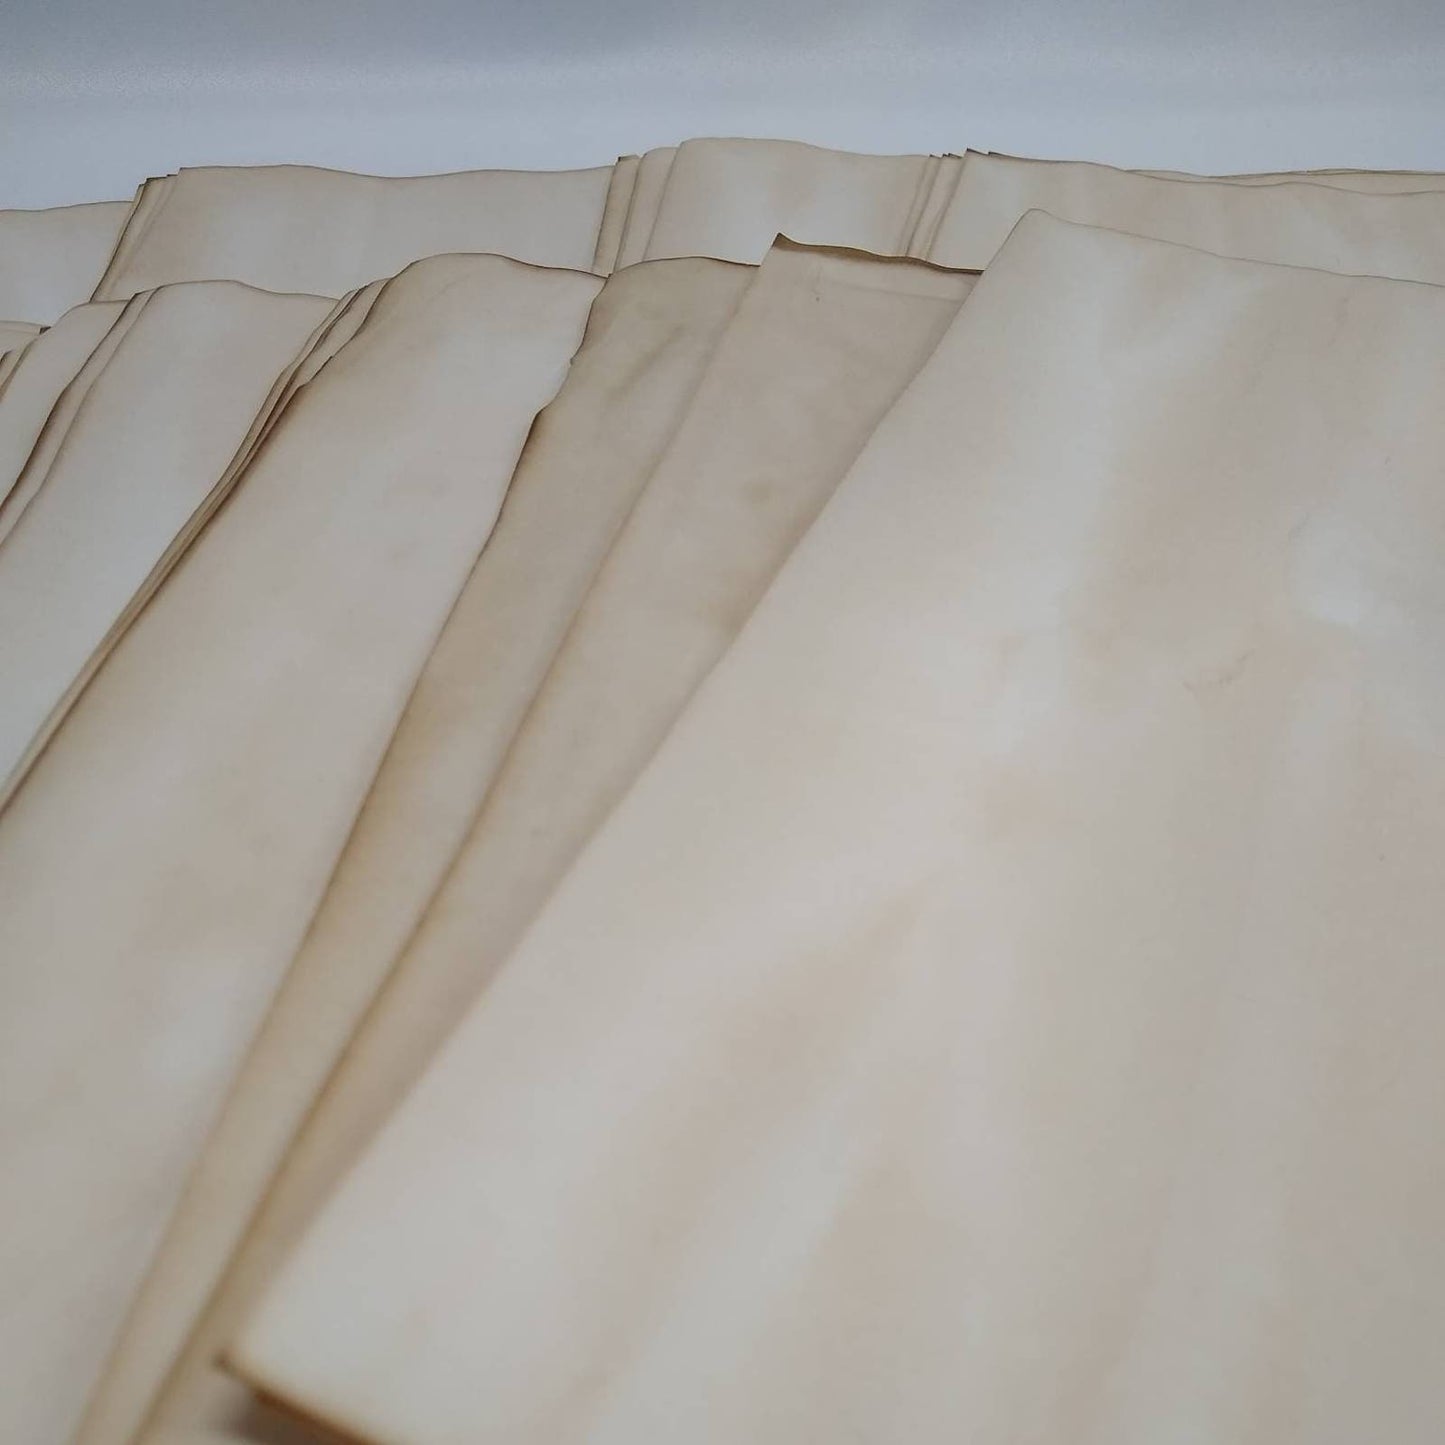 25 Coffee Dyed 8.5"x11" Papers, Hand Dyed Papers, Junk Journal Supply